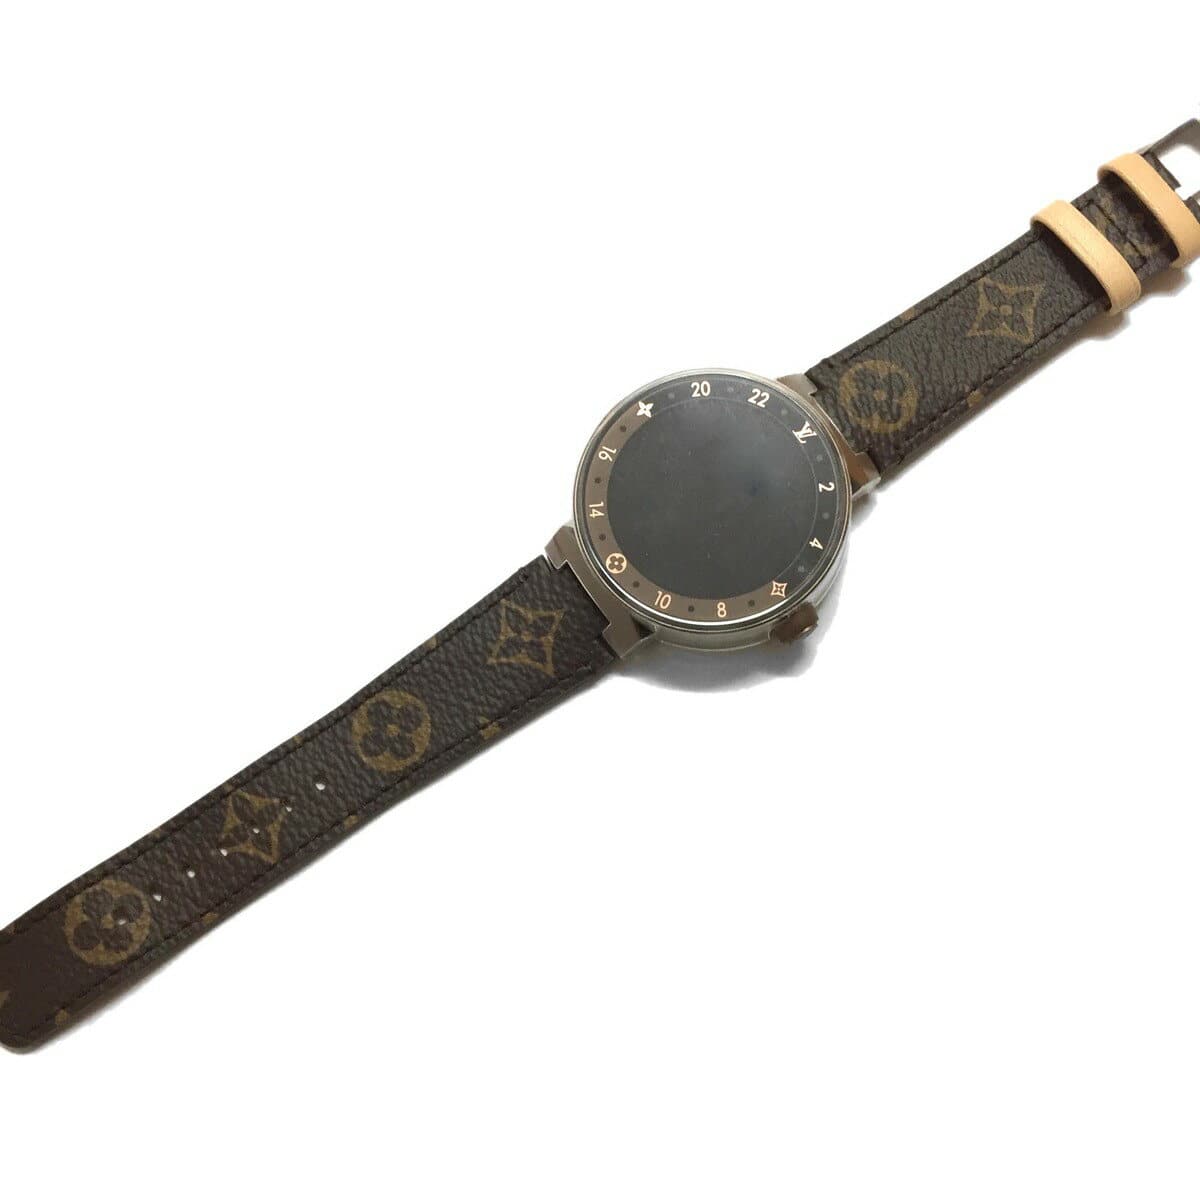 louis vuitton tambour watch charger